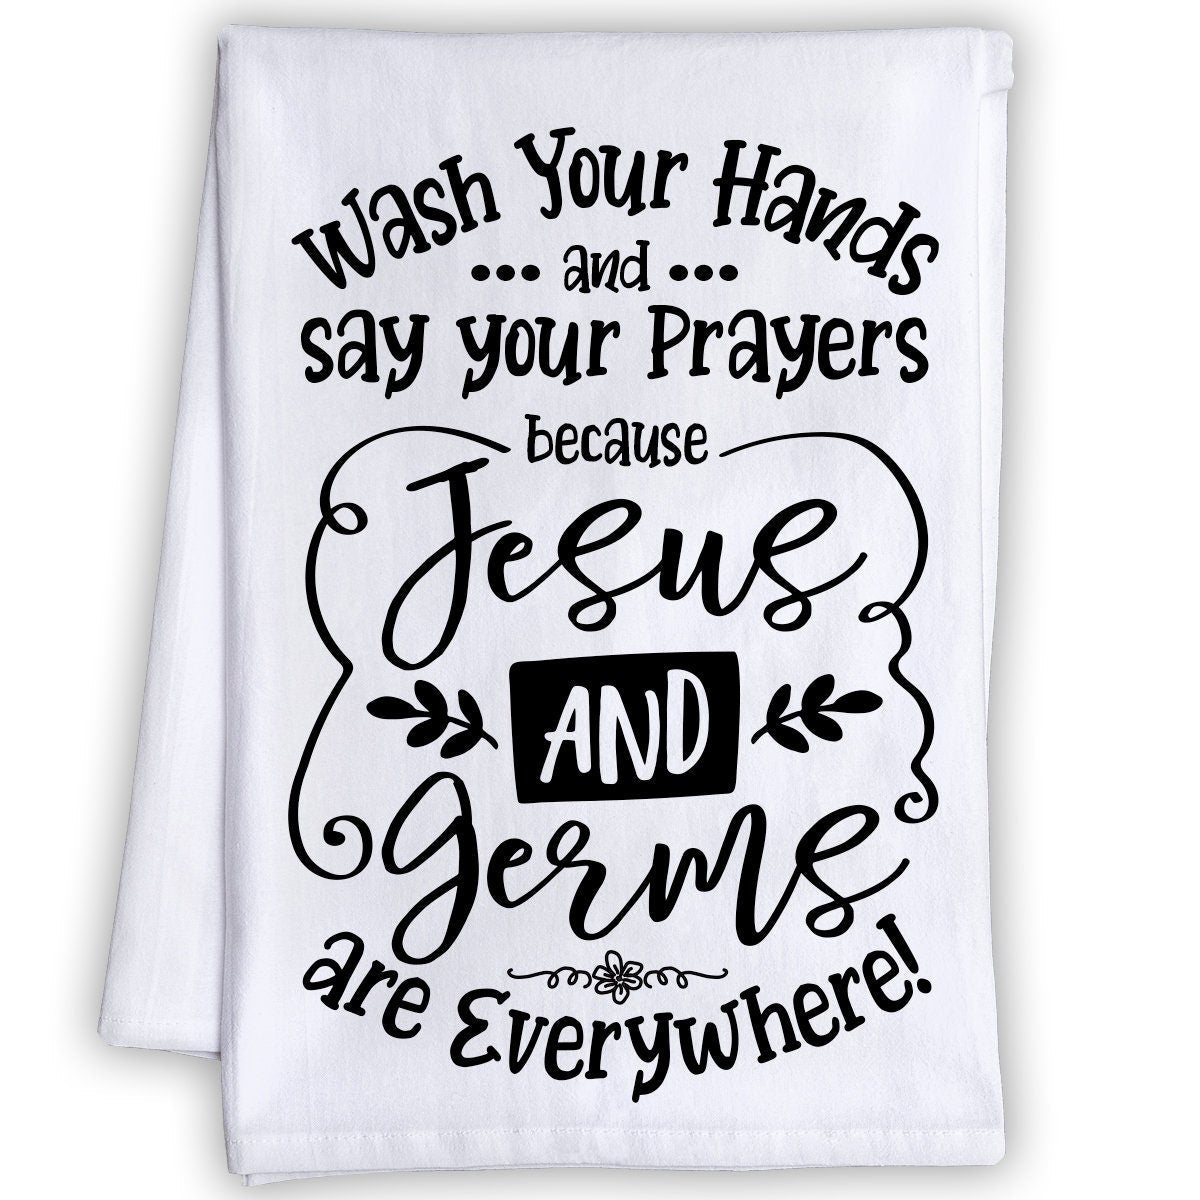 Funny Kitchen Tea Towels - Wash Your Hands and Say Your Prayers - Humorous Flour Sack Dish Towel-Great Gift for Christians and Kitchen Decor Lone Star Art 